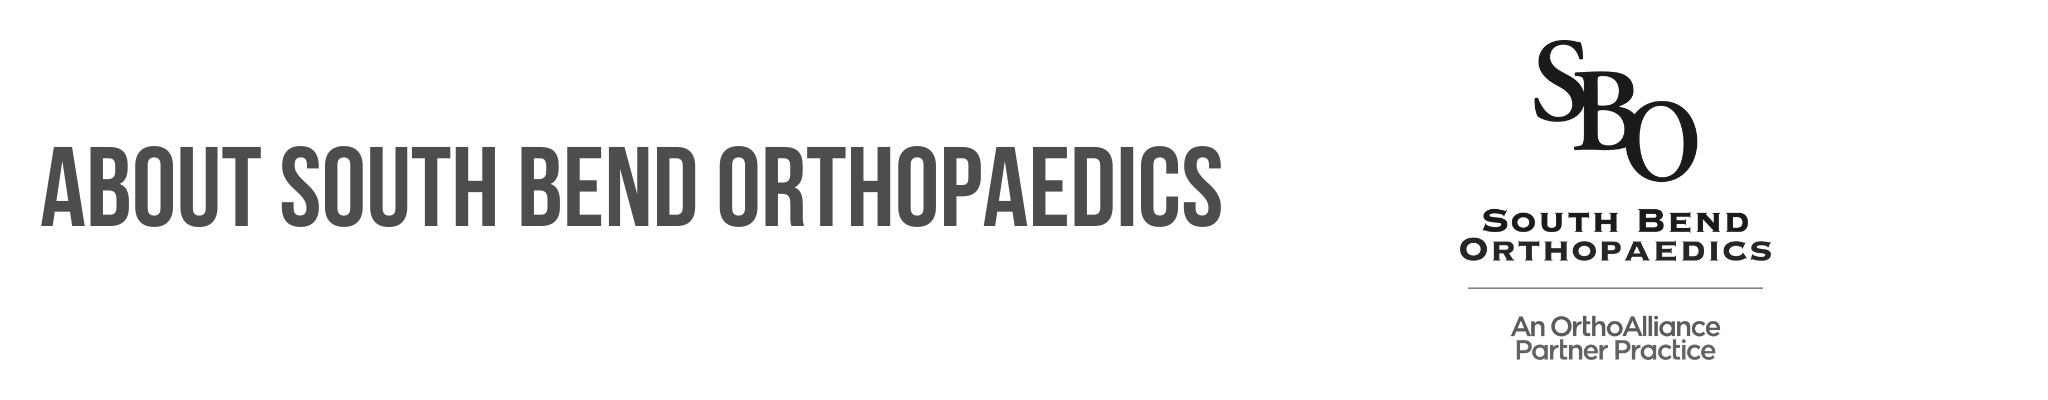 About South Bend Orthopaedics